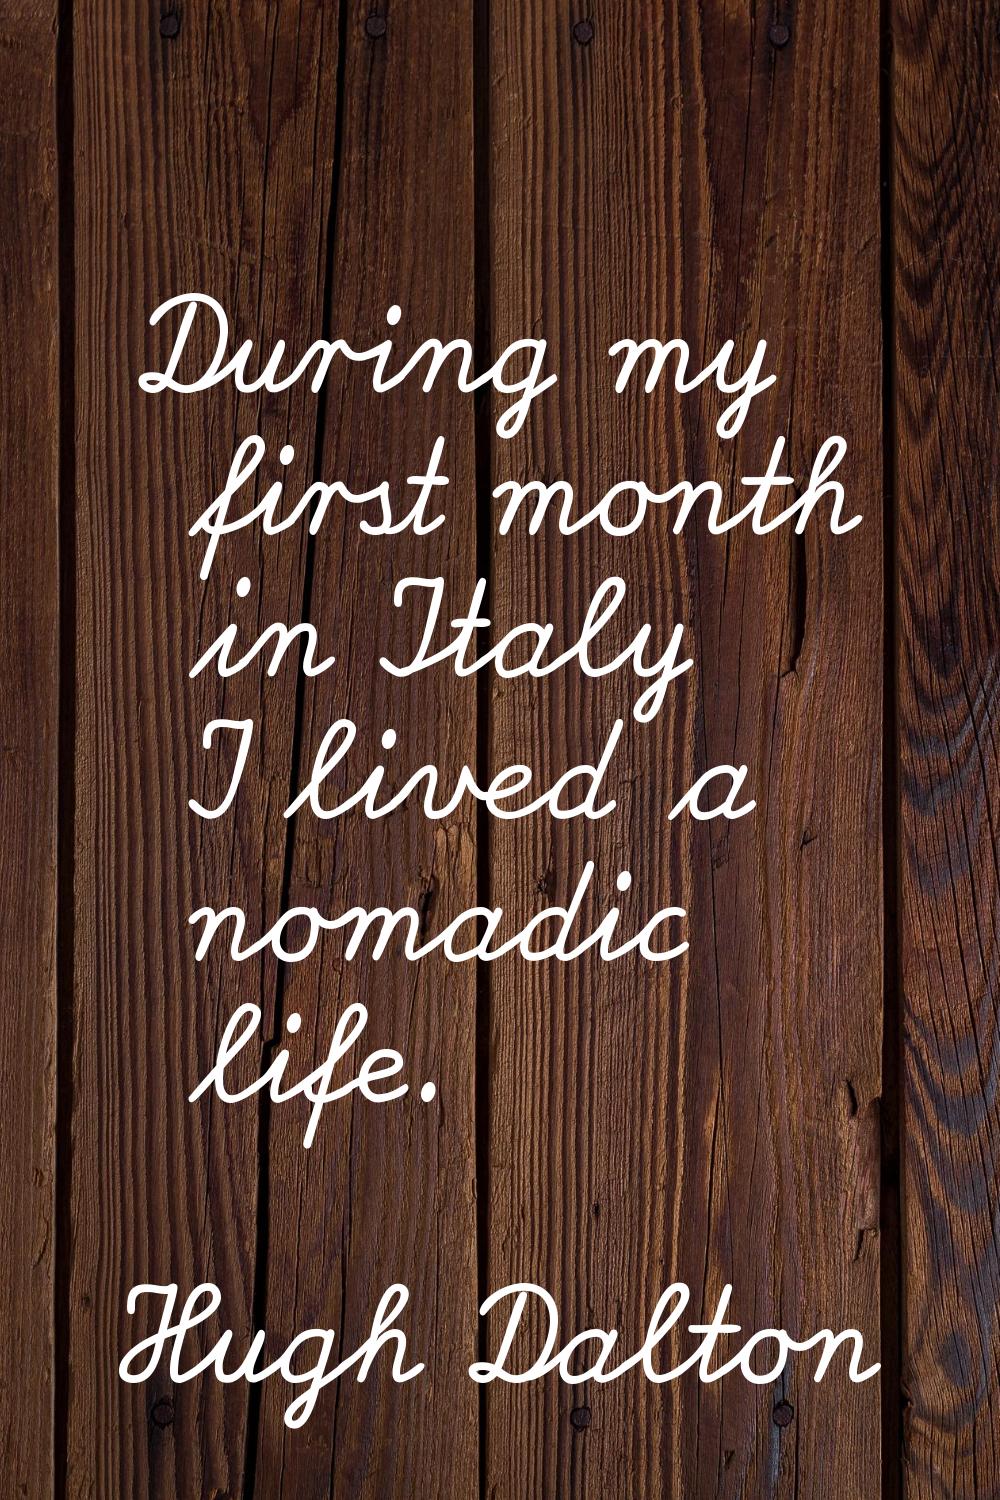 During my first month in Italy I lived a nomadic life.